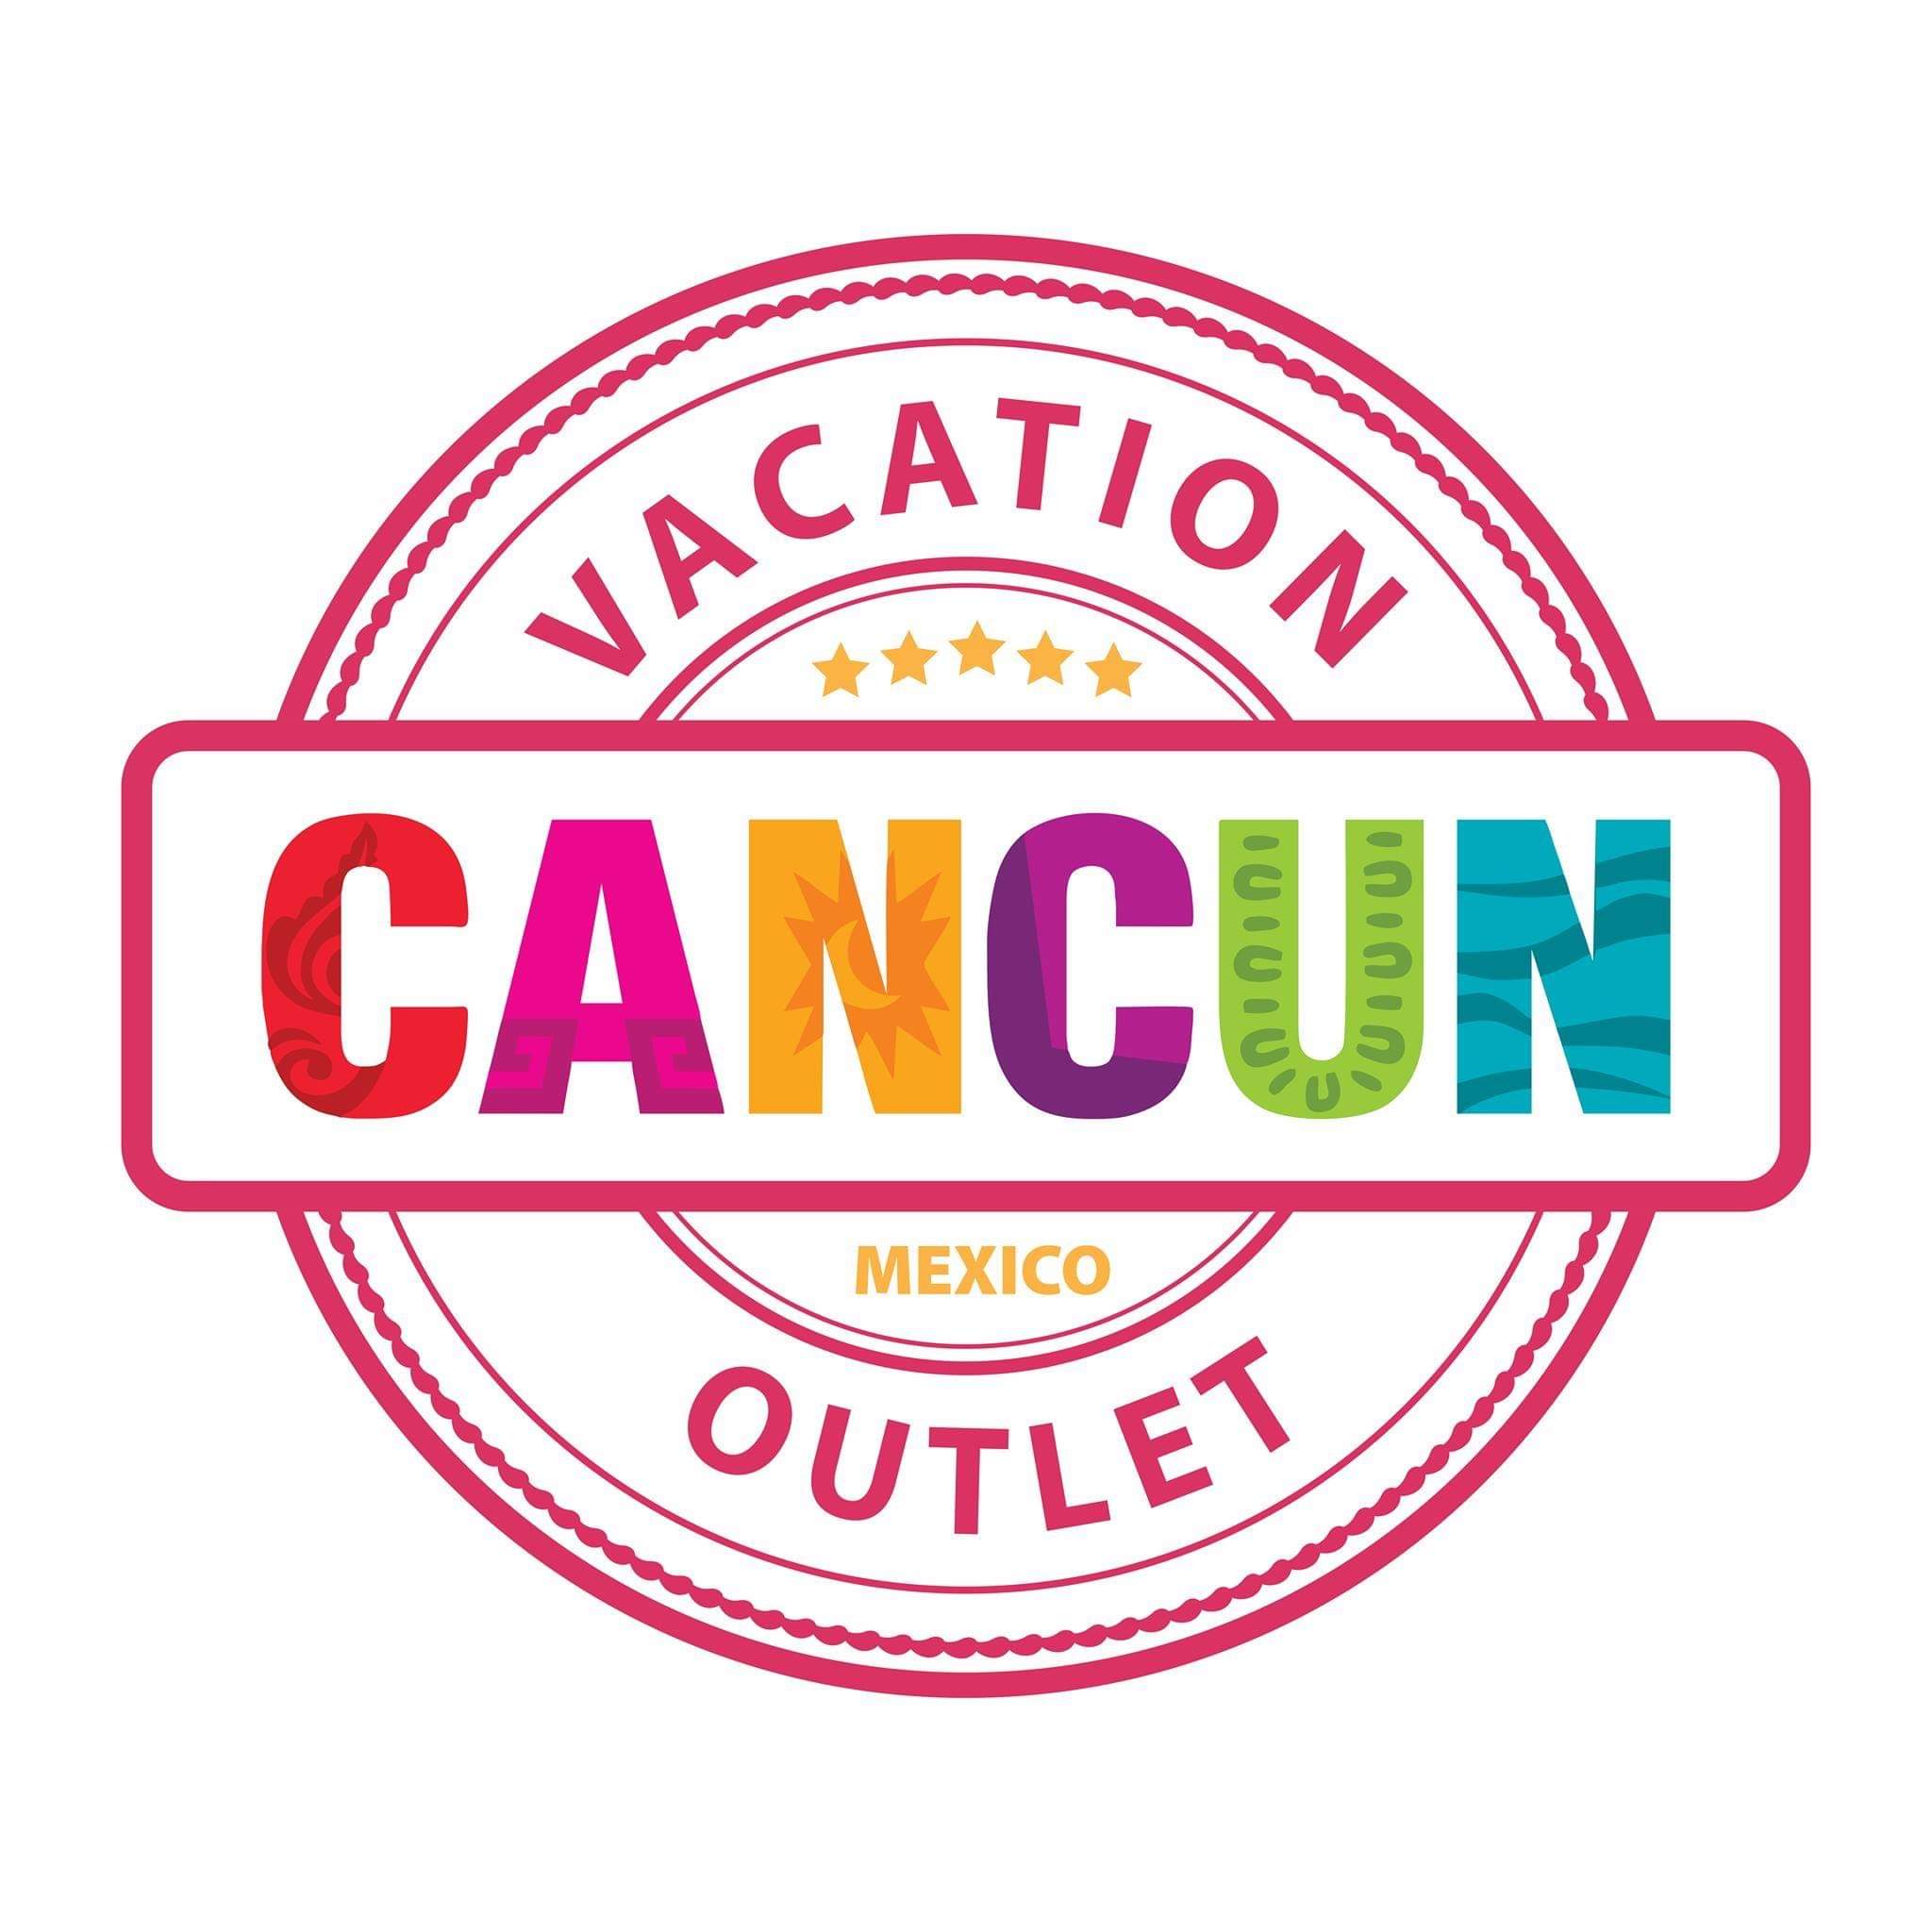 Cancun Vacation Outlet